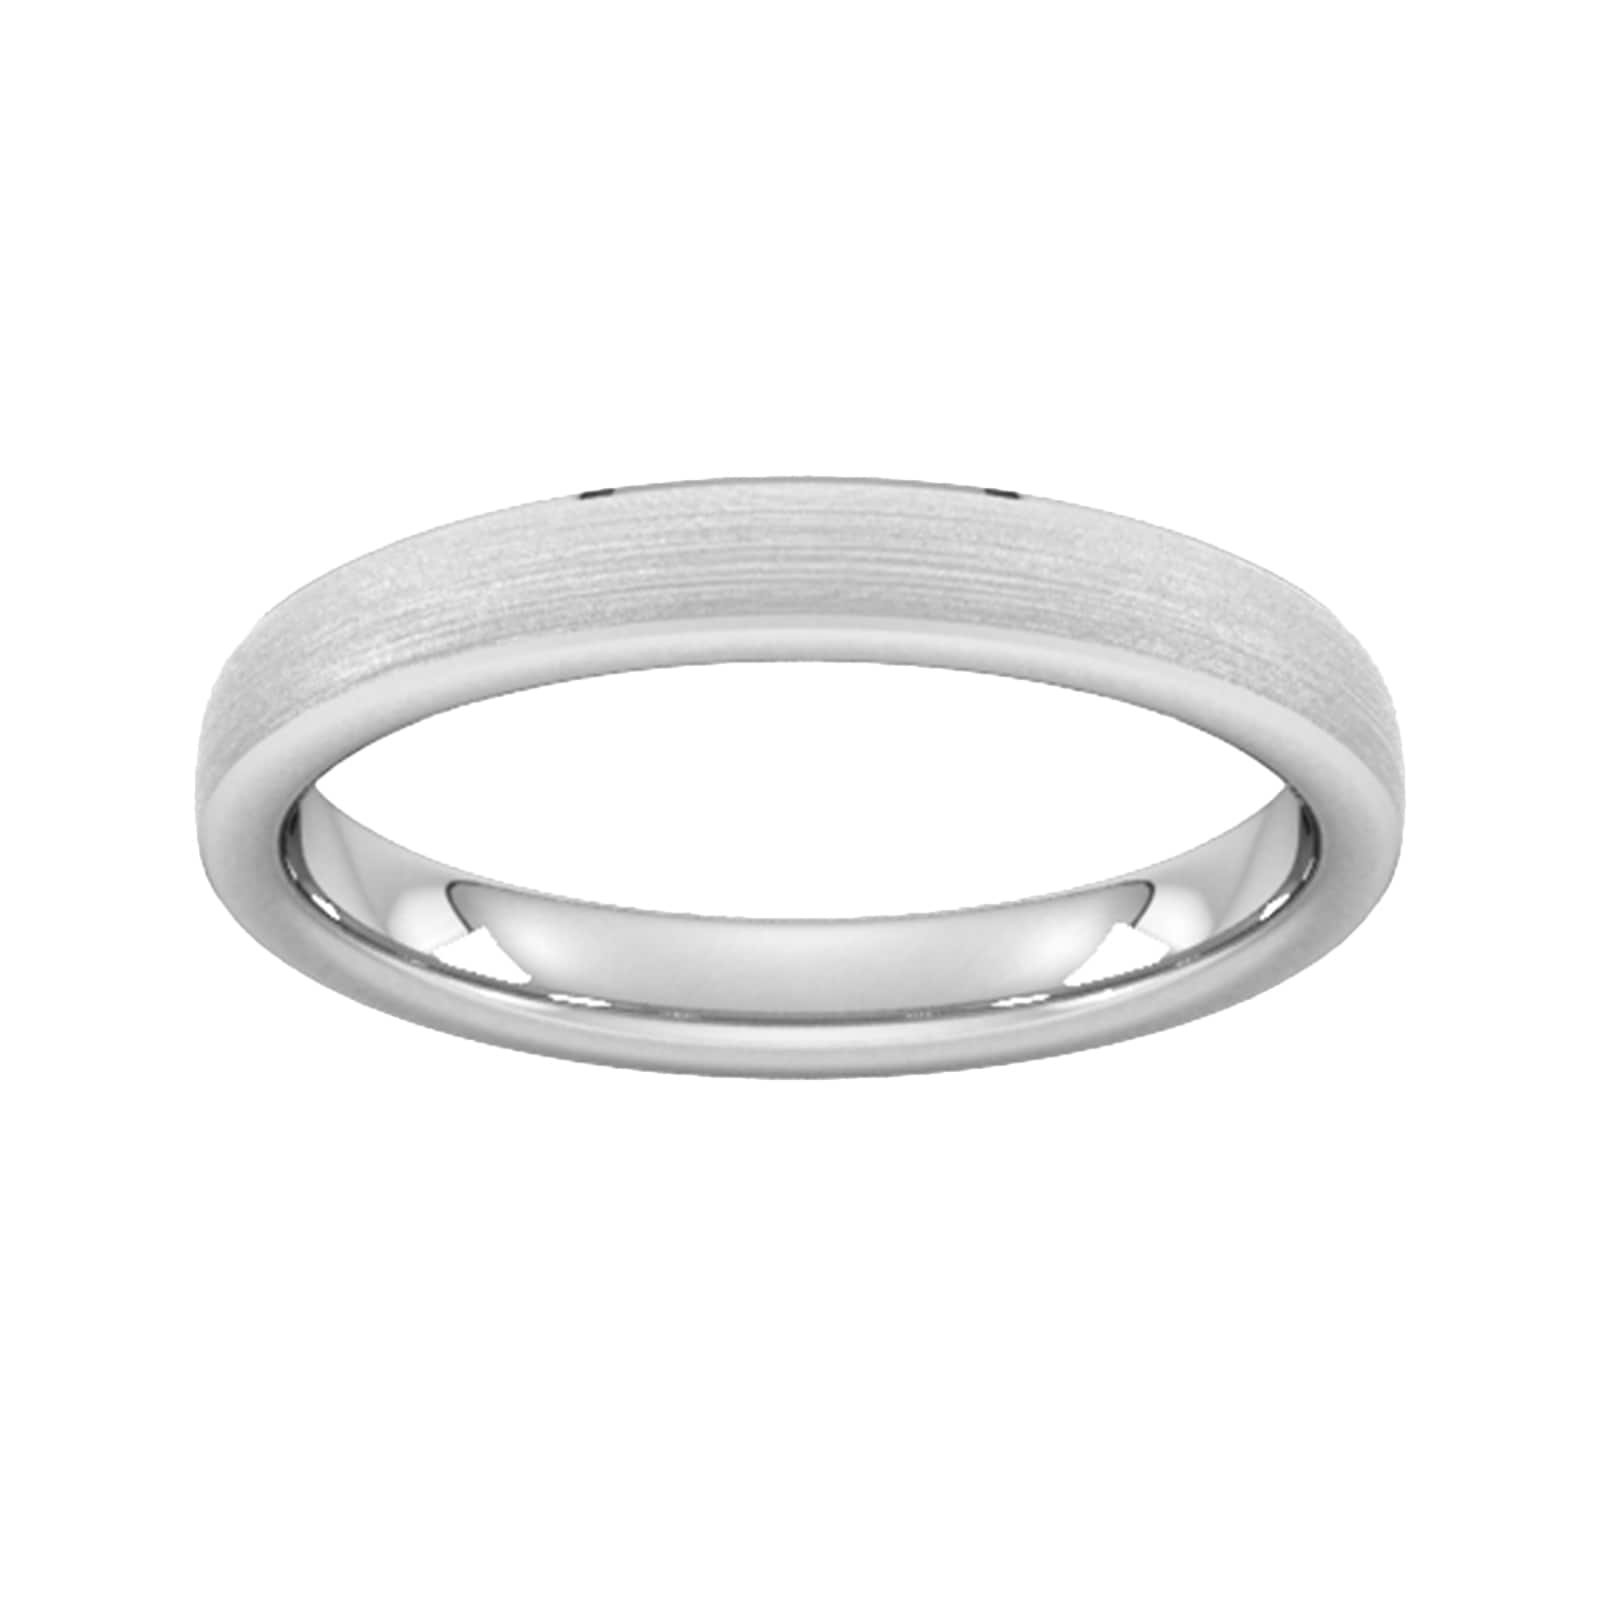 3mm D Shape Standard Polished Chamfered Edges With Matt Centre Wedding Ring In 950 Palladium - Ring Size L